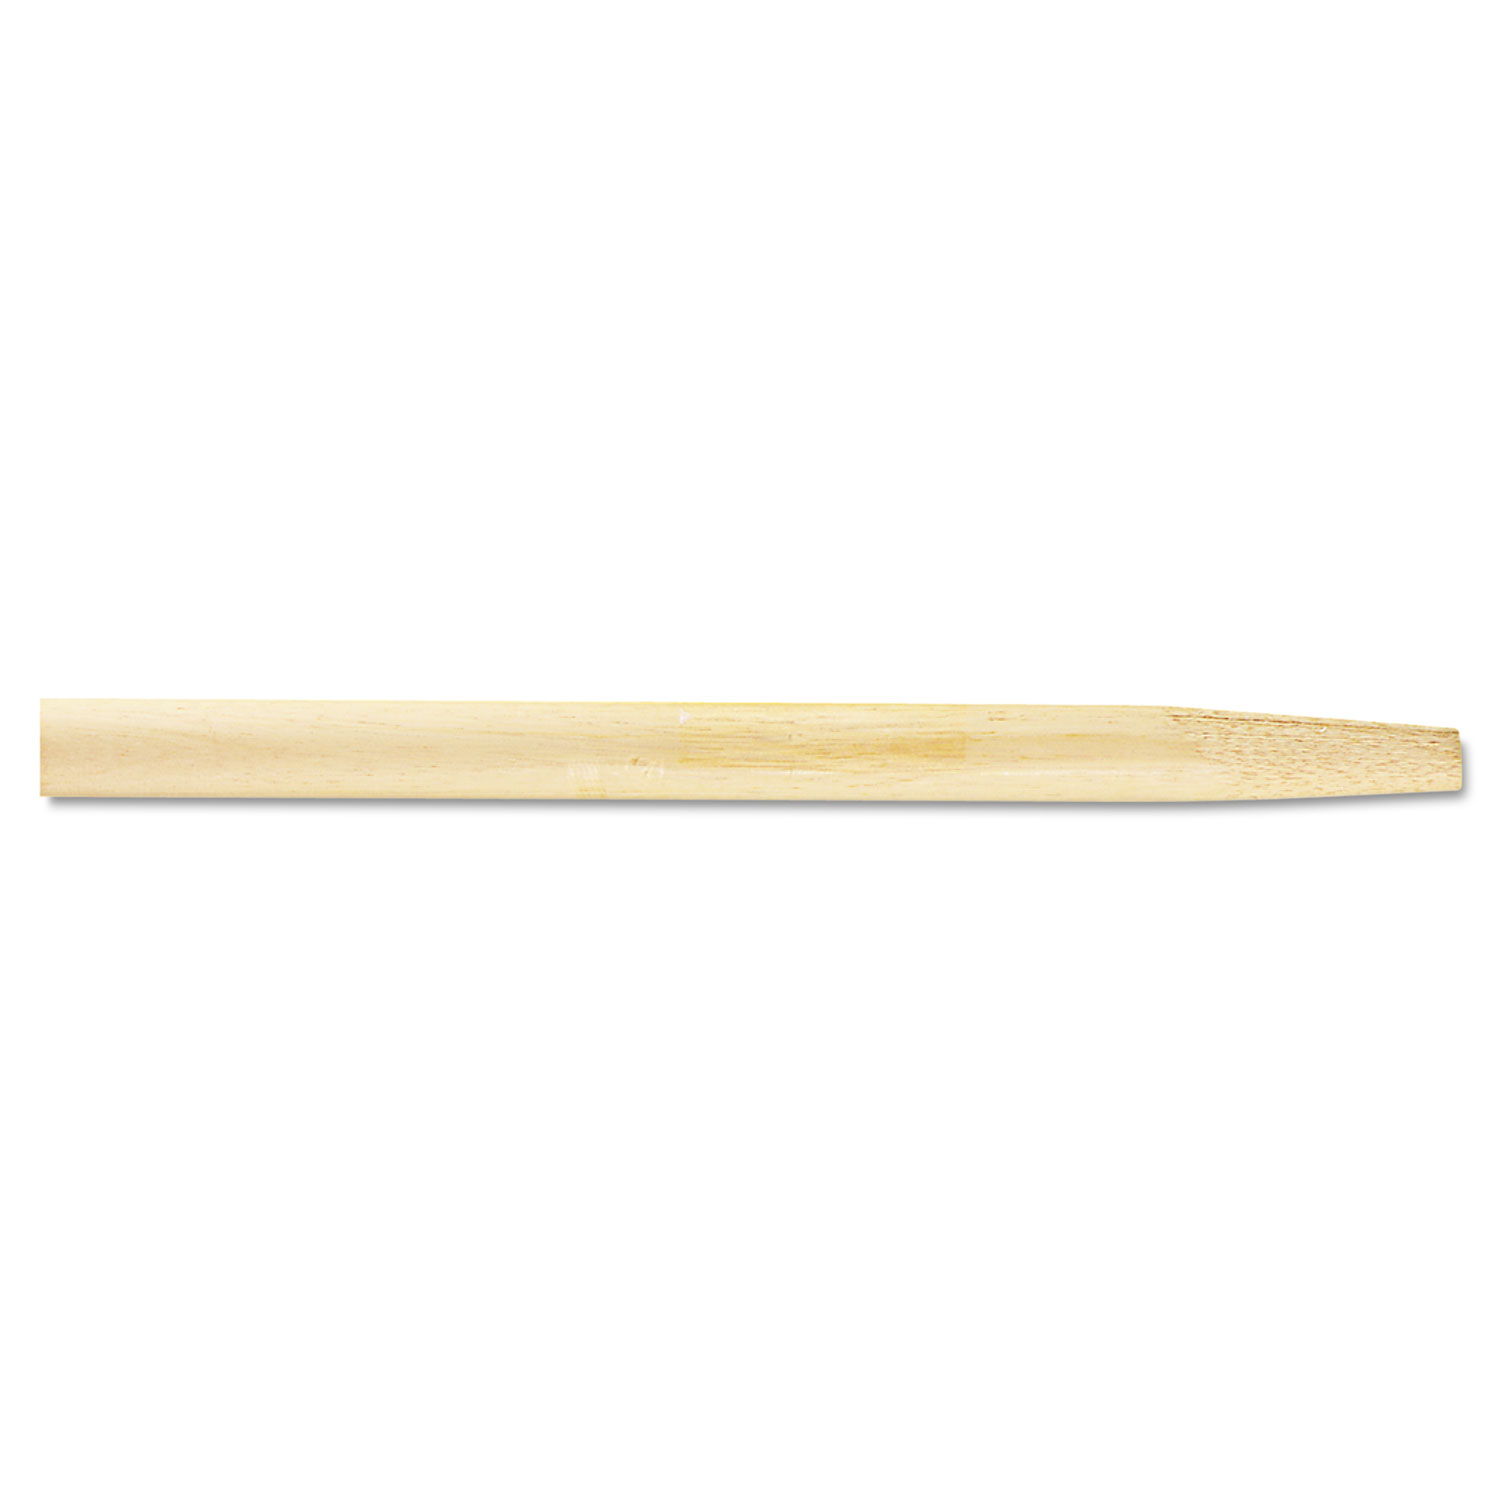  Boardwalk BWK124 Tapered End Broom Handle, Lacquered Hardwood, 1 1/8 dia x 54, Natural (BWK124) 